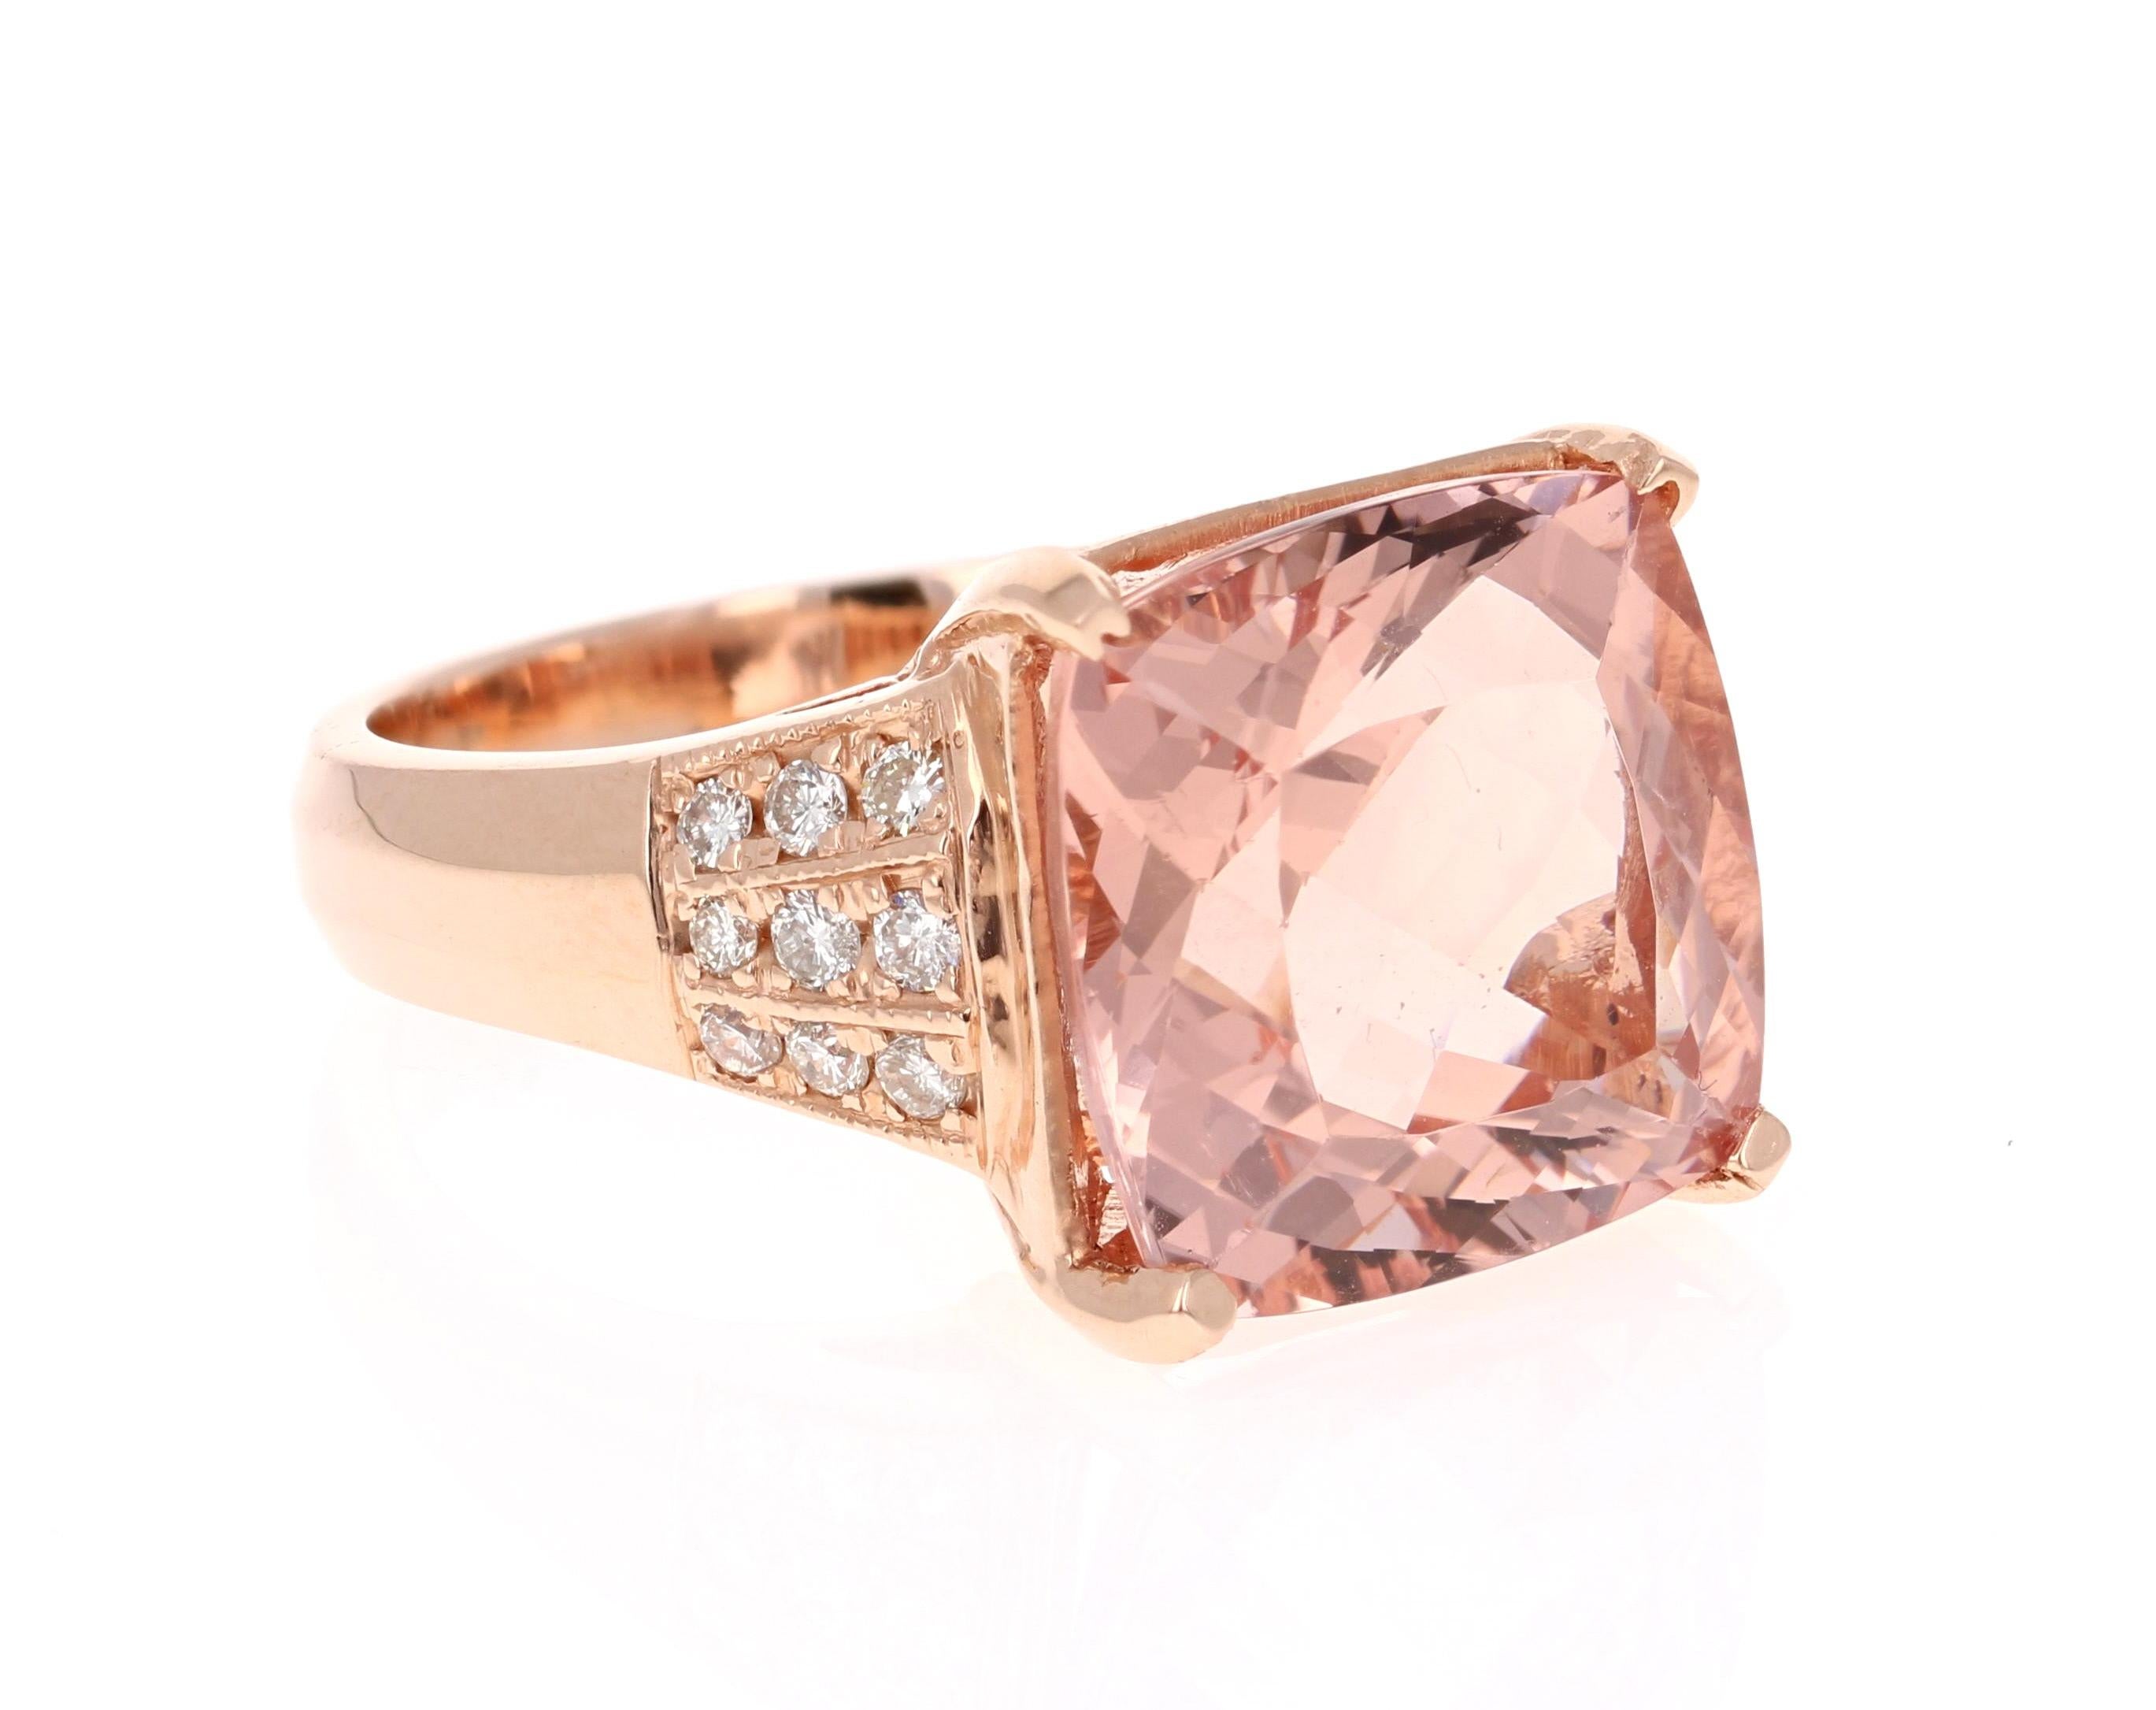 Simply a Stunner and a Statement!

This Morganite ring has a 10.42 Square Cushion Cut Morganite and is surrounded by 8 Round Cut Diamonds that weigh 0.37 Carats. The total carat weight of the ring is 10.79 Carats. 

It is crafted and set in 14 Karat